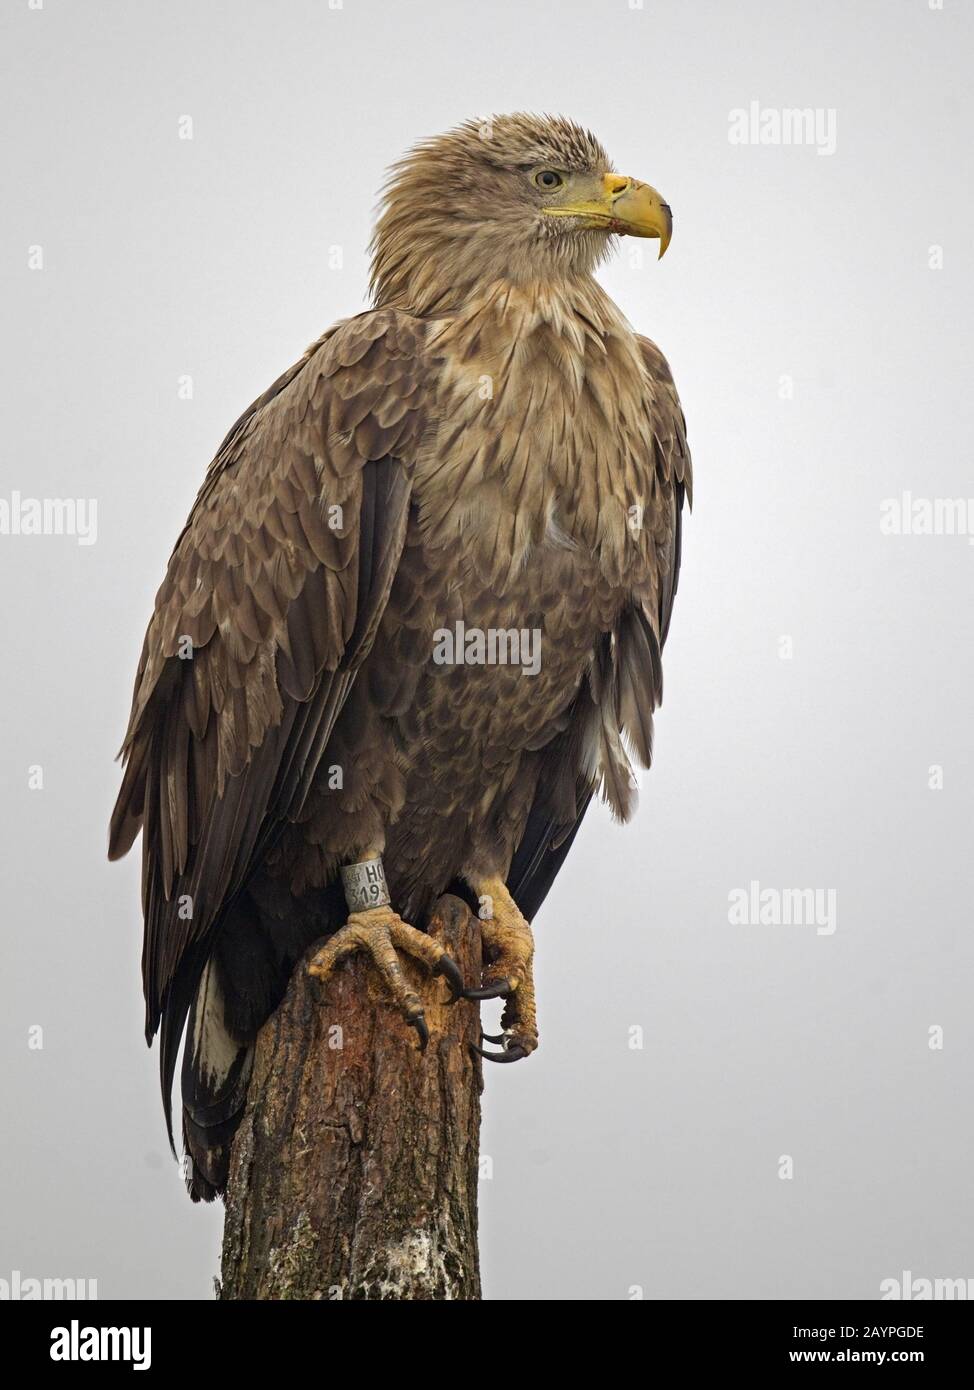 Adult white-tailed eagle perched Stock Photo